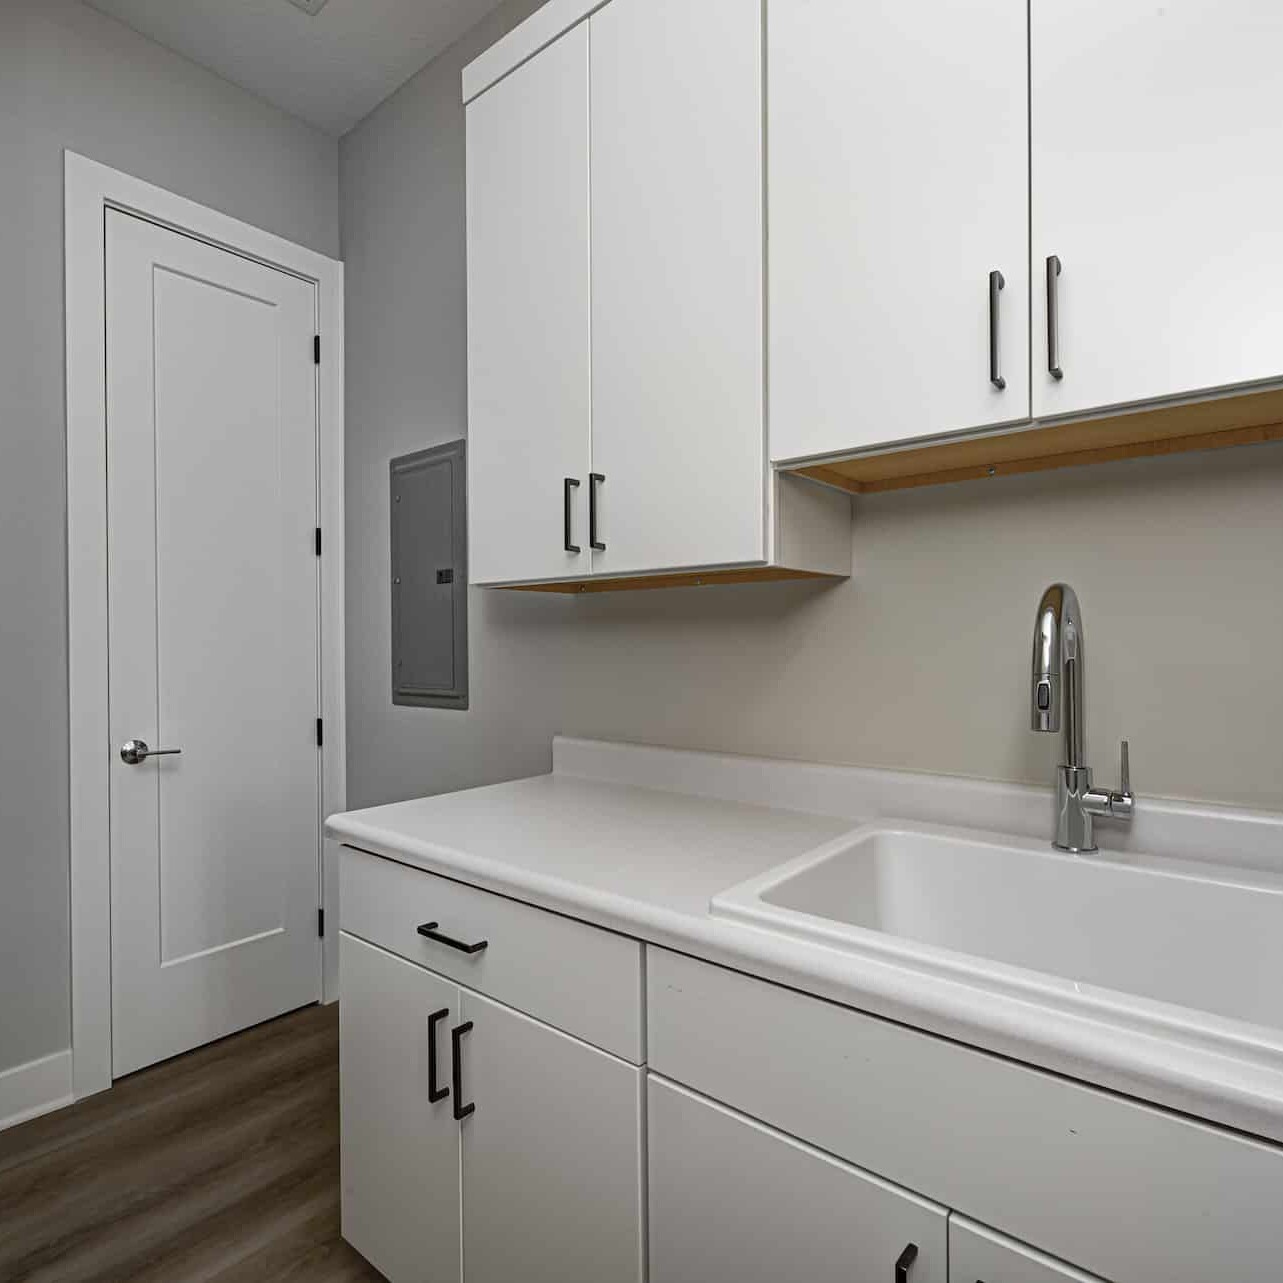 A laundry room with white cabinets and a sink designed by a Custom Home Builder in Carmel Indiana.